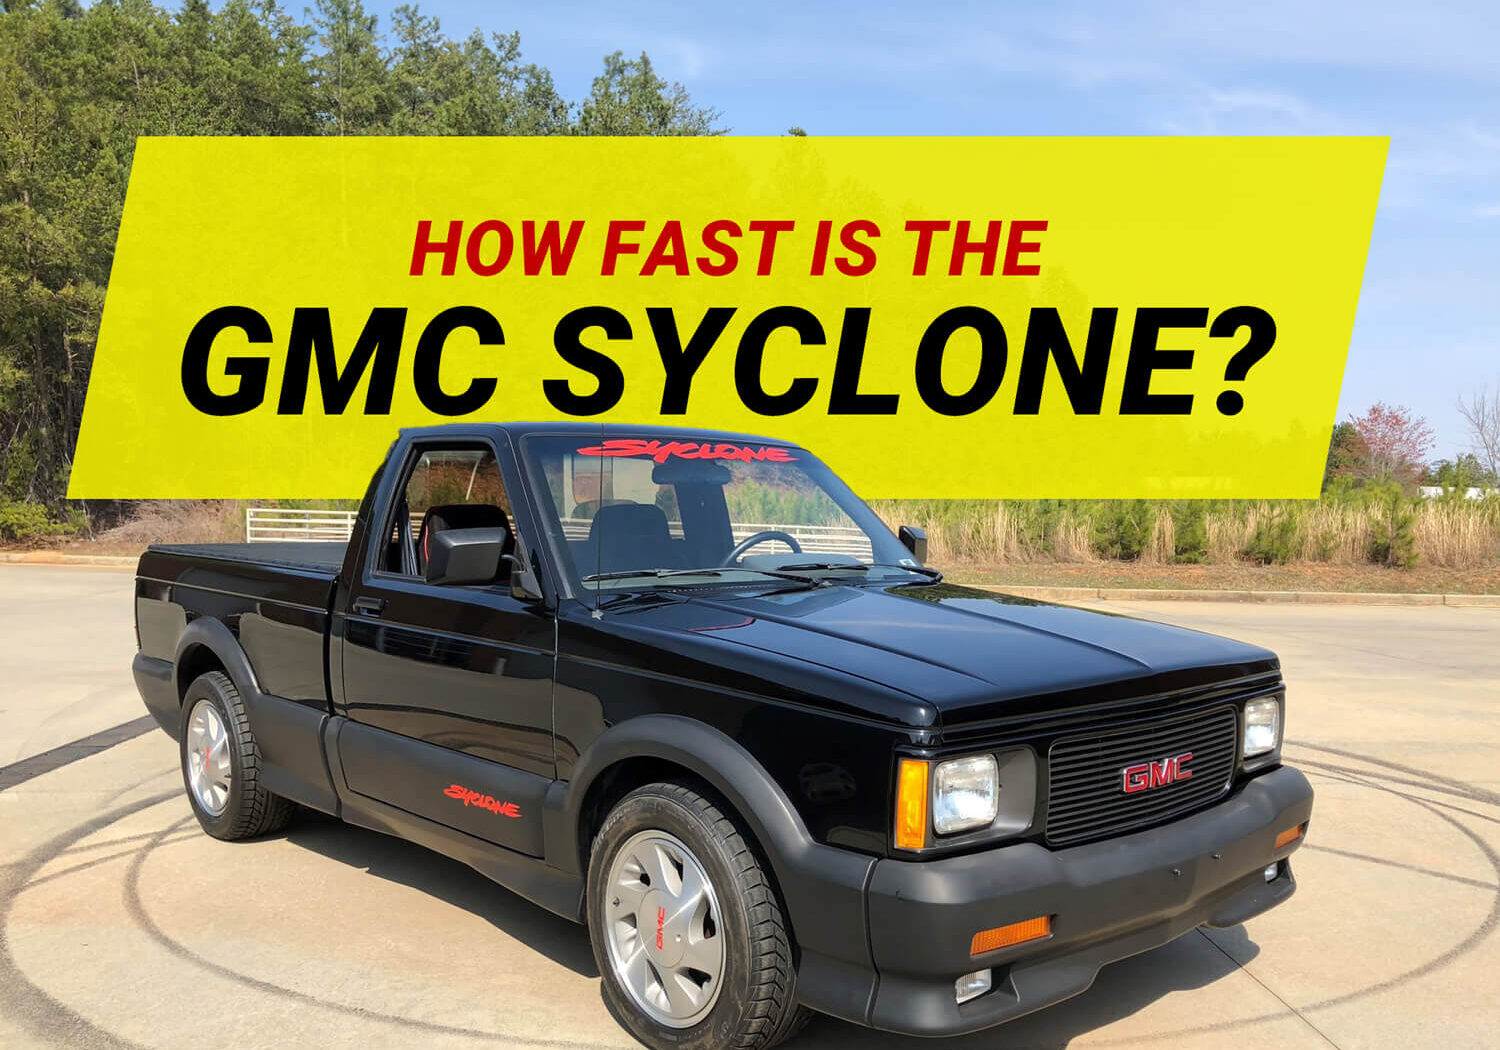 How fast is the GMC Syclone?